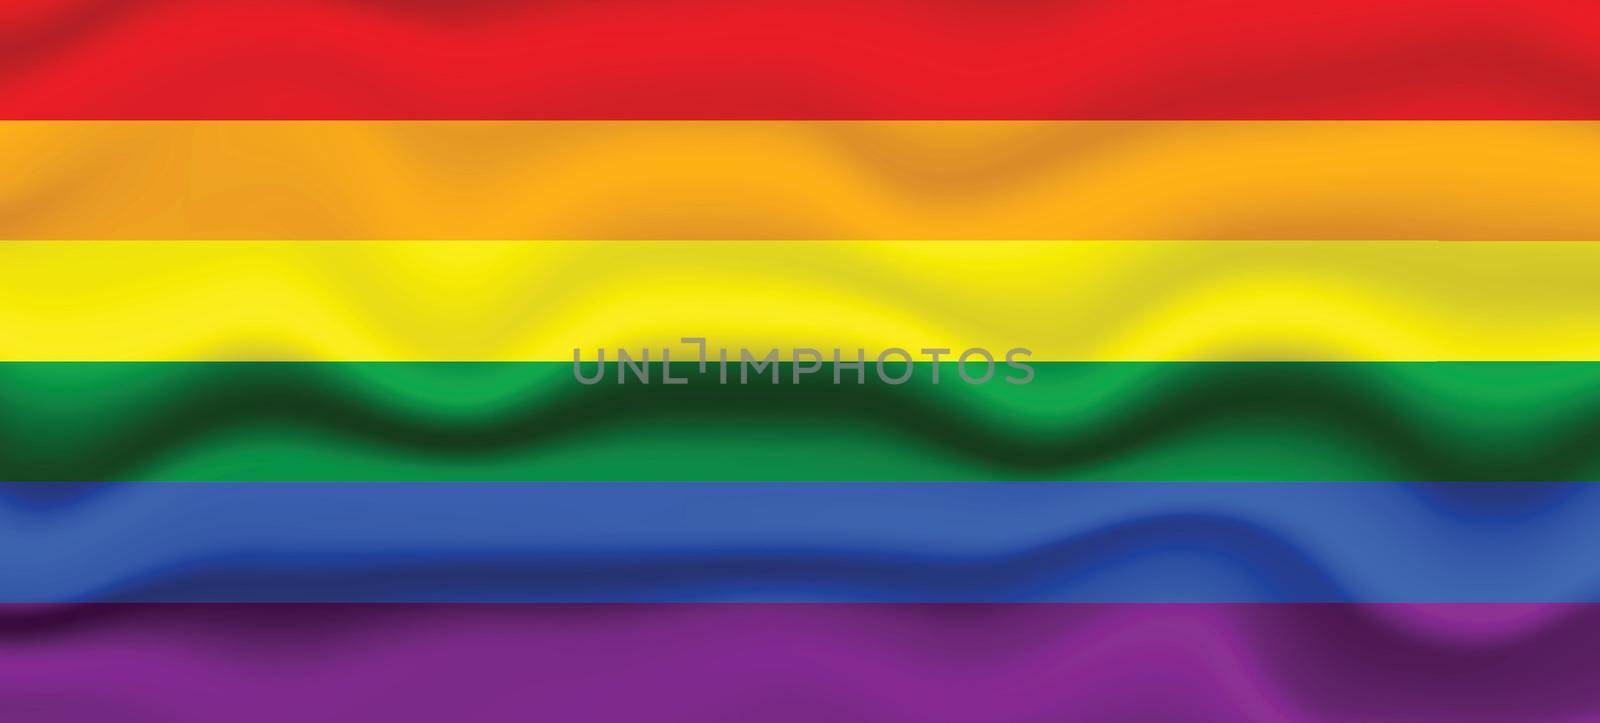 Flag LGBT squared icon, badge or button. Template design, vector illustration. Love wins. LGBT symbol in rainbow colors. Gay pride silk textile background.